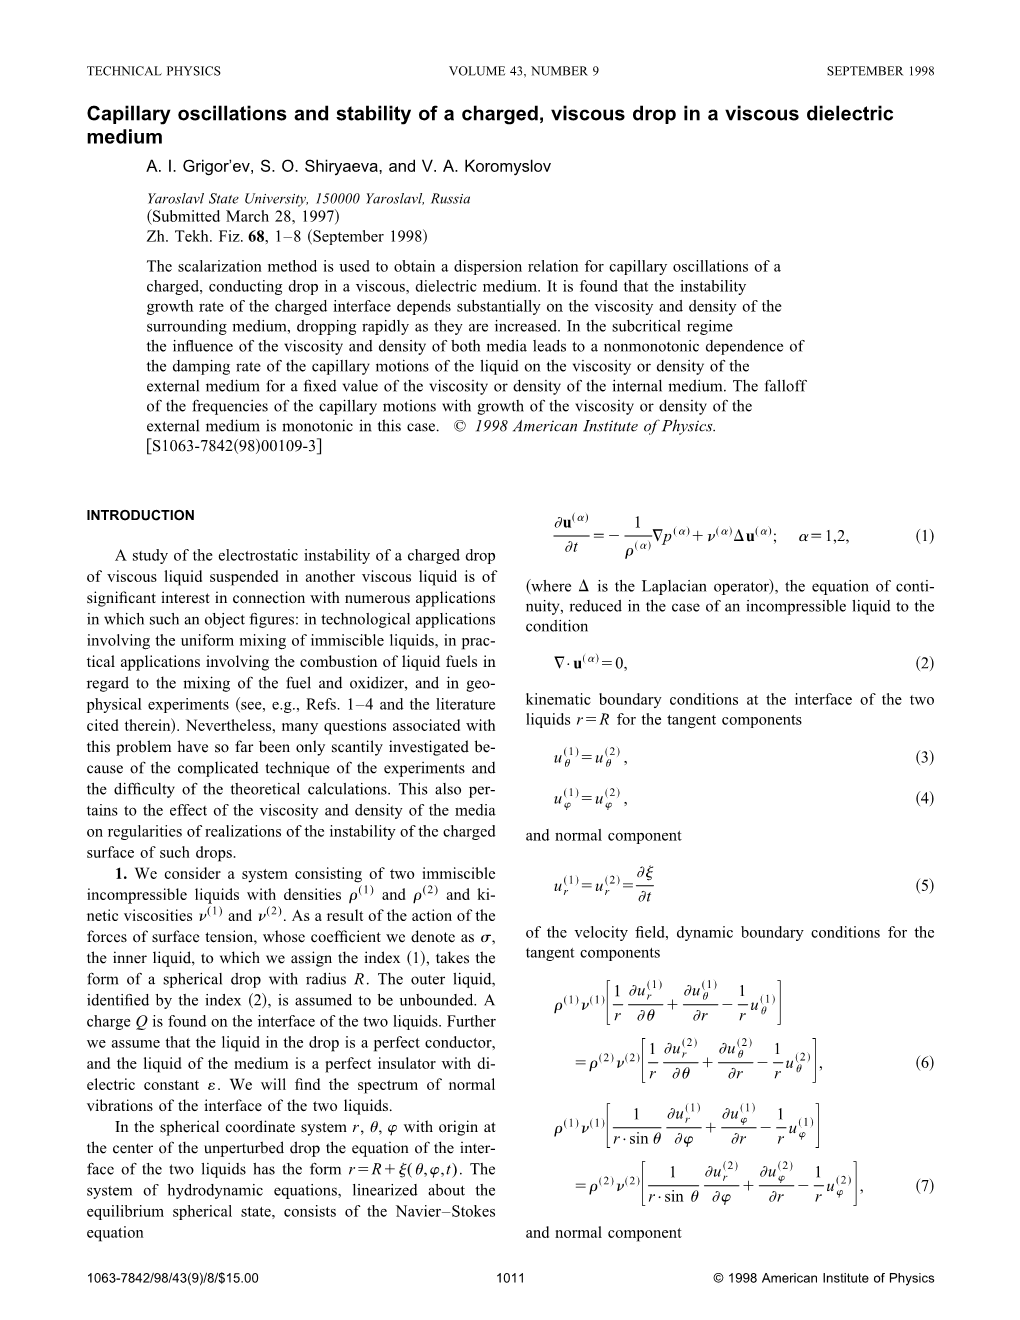 Capillary Oscillations and Stability of a Charged, Viscous Drop in a Viscous Dielectric Medium A